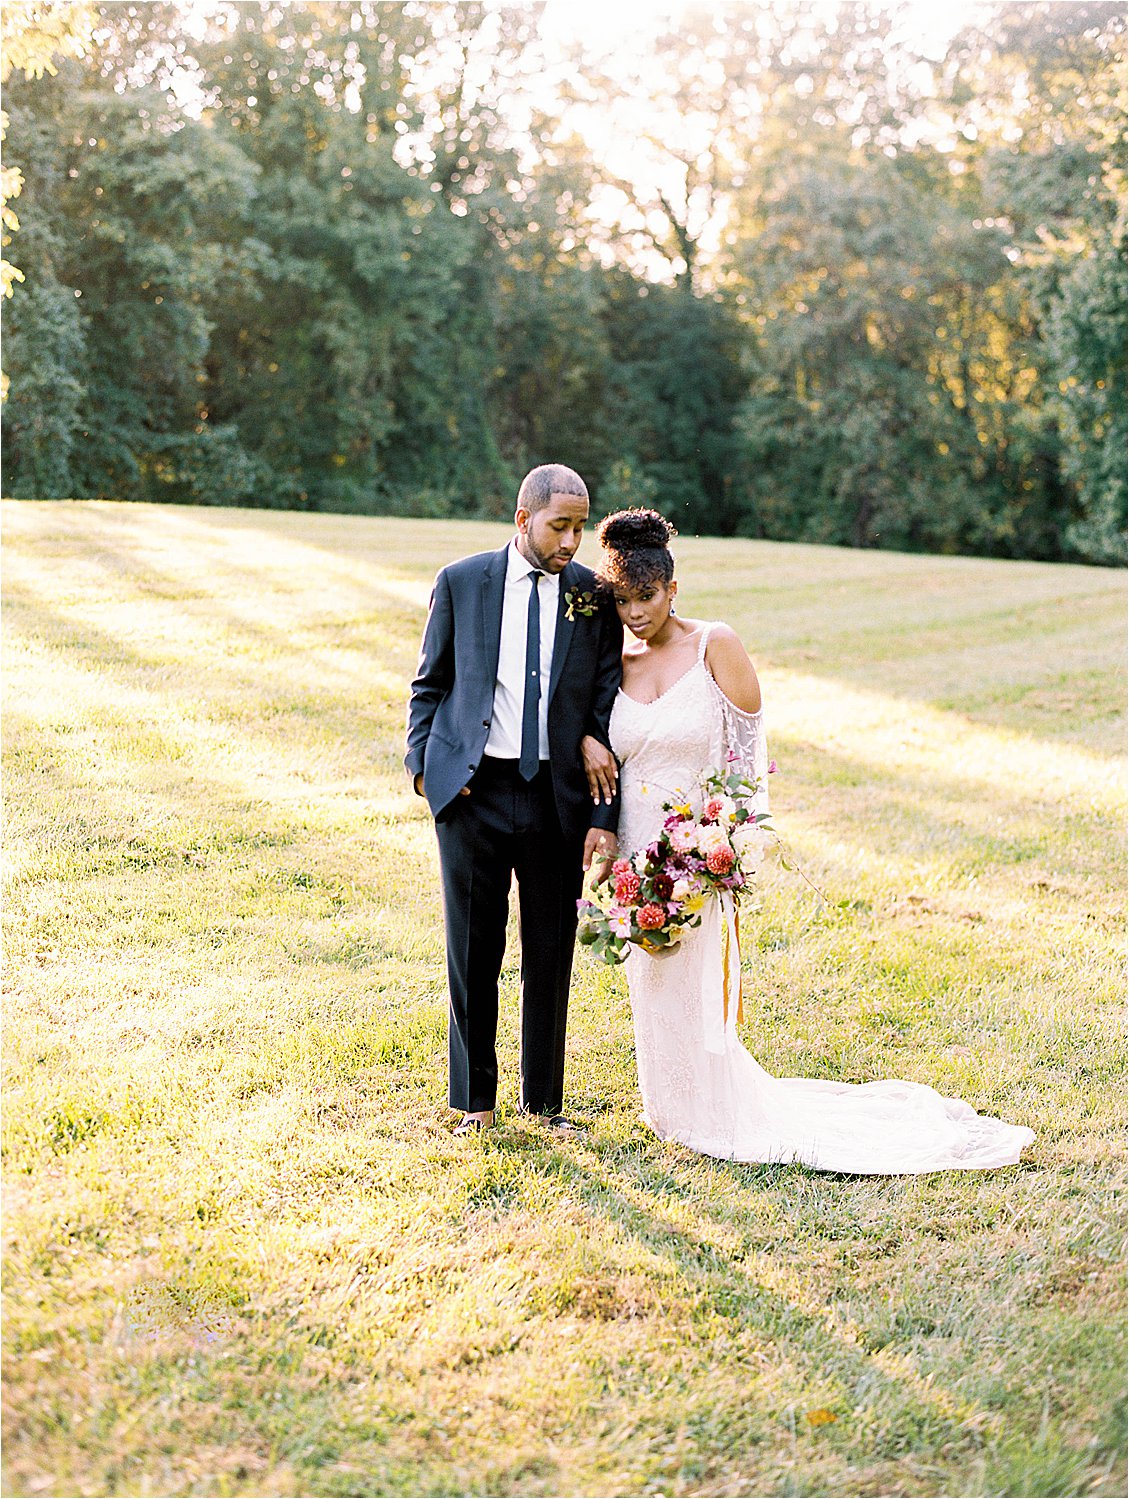 Film image of Bride and Groom at Mt. Airy Mansion Vow Renewal in Maryland by Renee Hollingshead